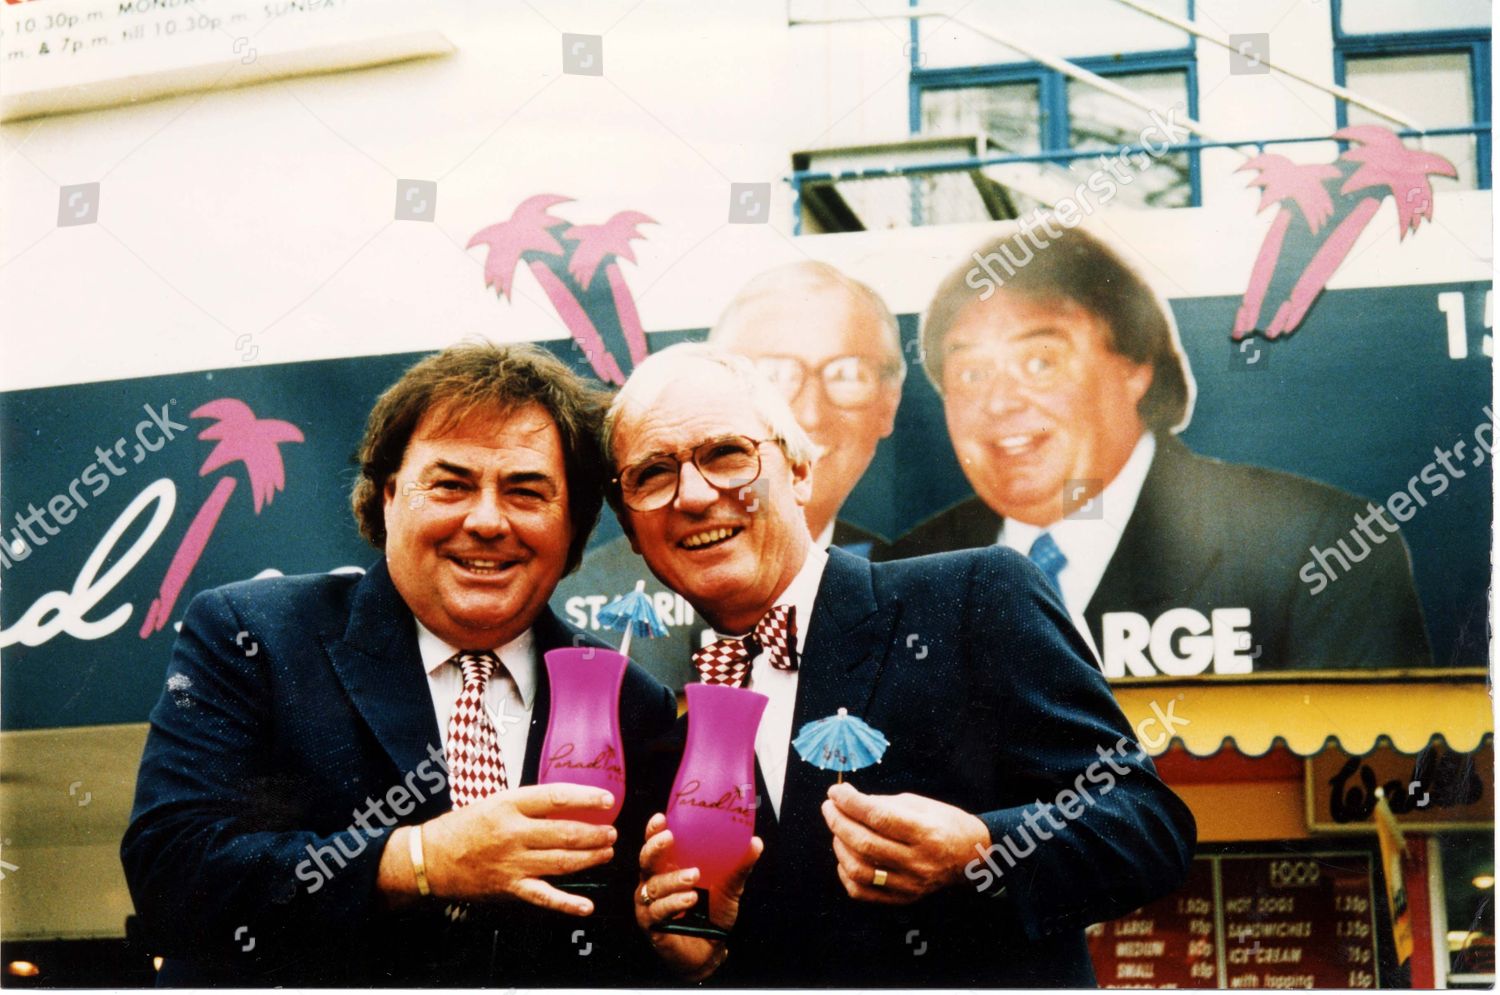 eddie-large-and-syd-little-with-pink-cocktail-glasses-in-front-of-the-paradise-room-at-blackpool-pleasure-beach-1995-shutterstock-editorial-3081691a.jpg